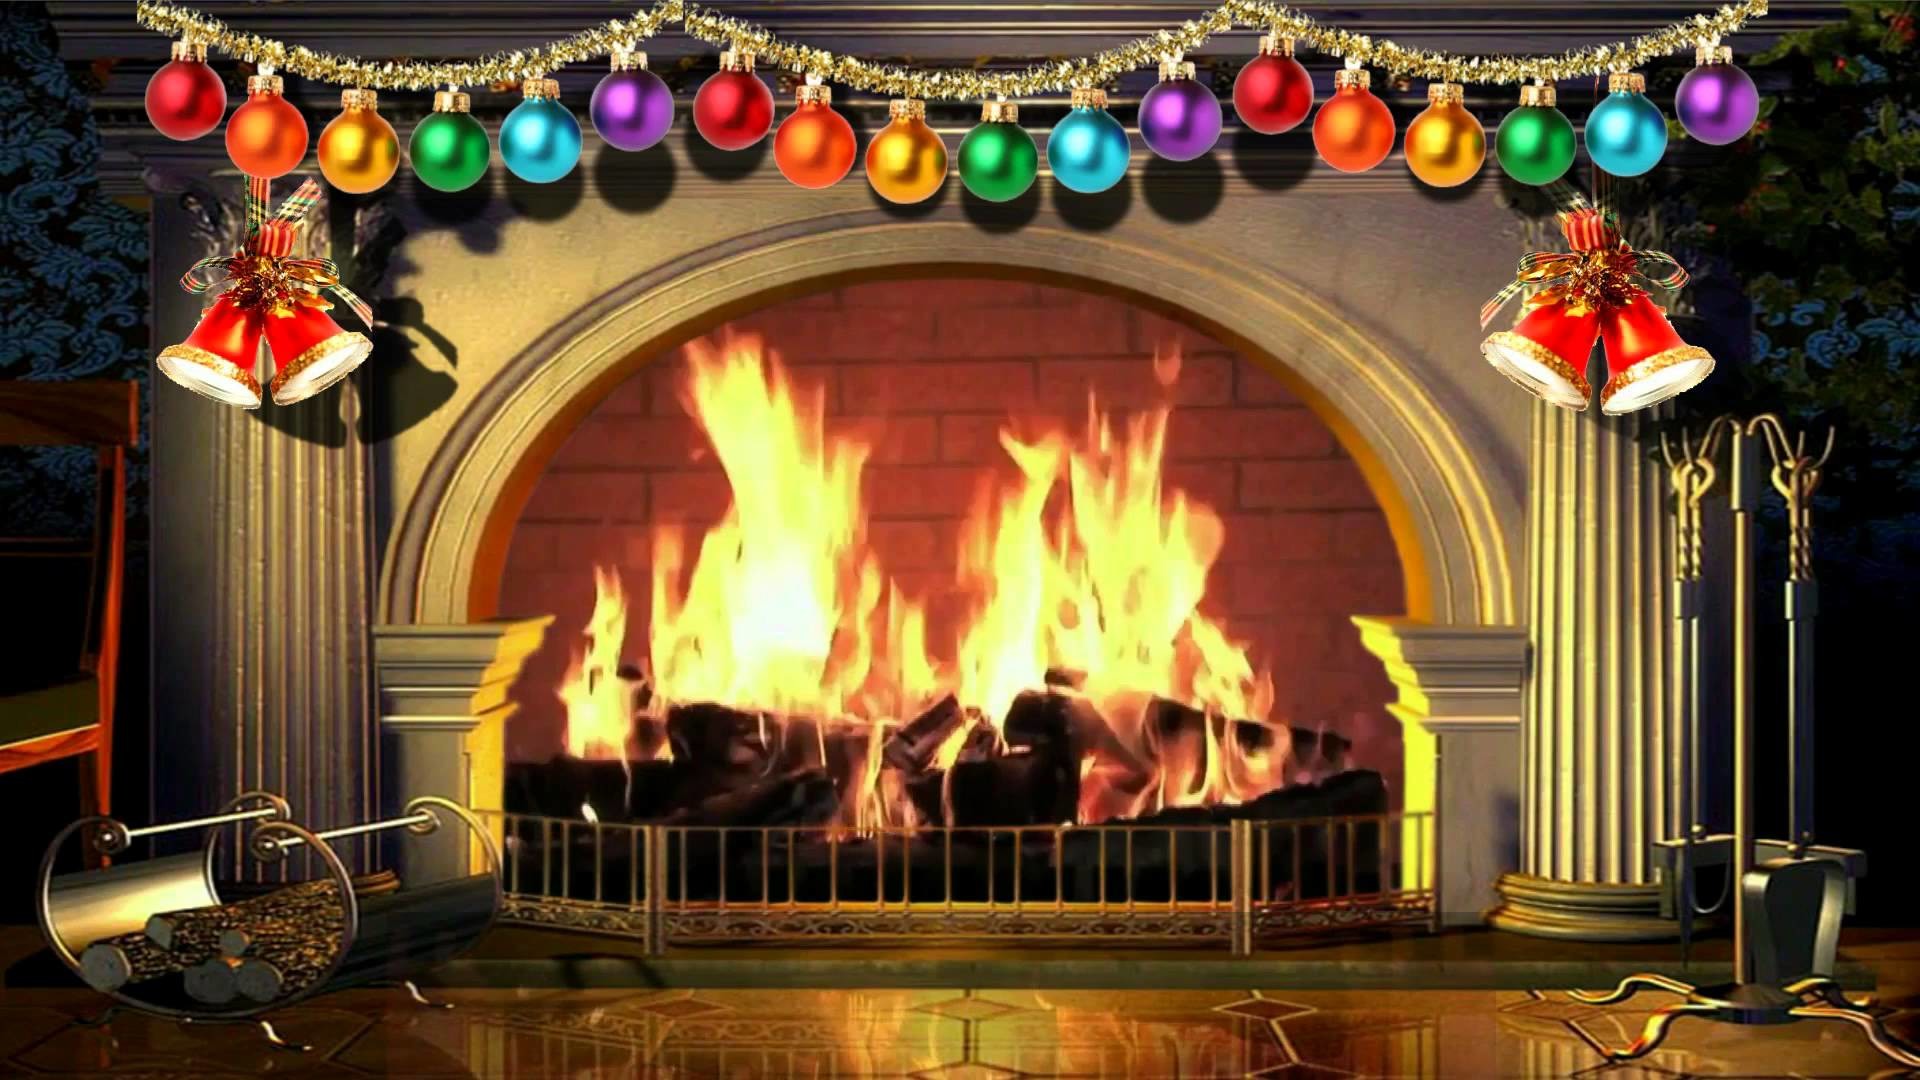 1920x1080 Virtual Christmas Fireplace - Free background video 1080p HD 15 minute loop  - YouTube